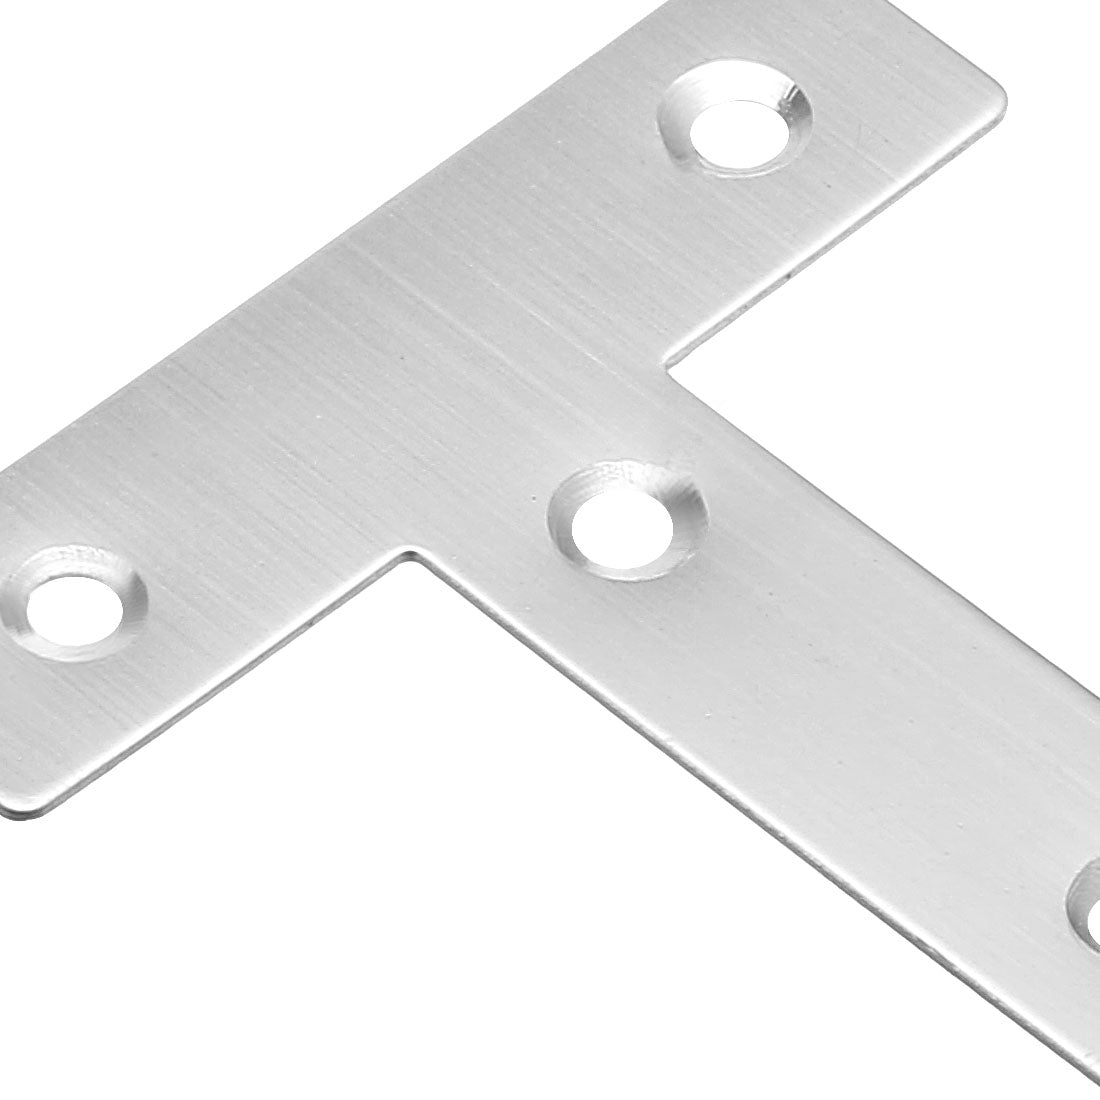 uxcell Uxcell Flat T Shape Repair Mending Plate, 60mmx60mm, Stainless steel Joining Bracket Support Brace, 5 pcs